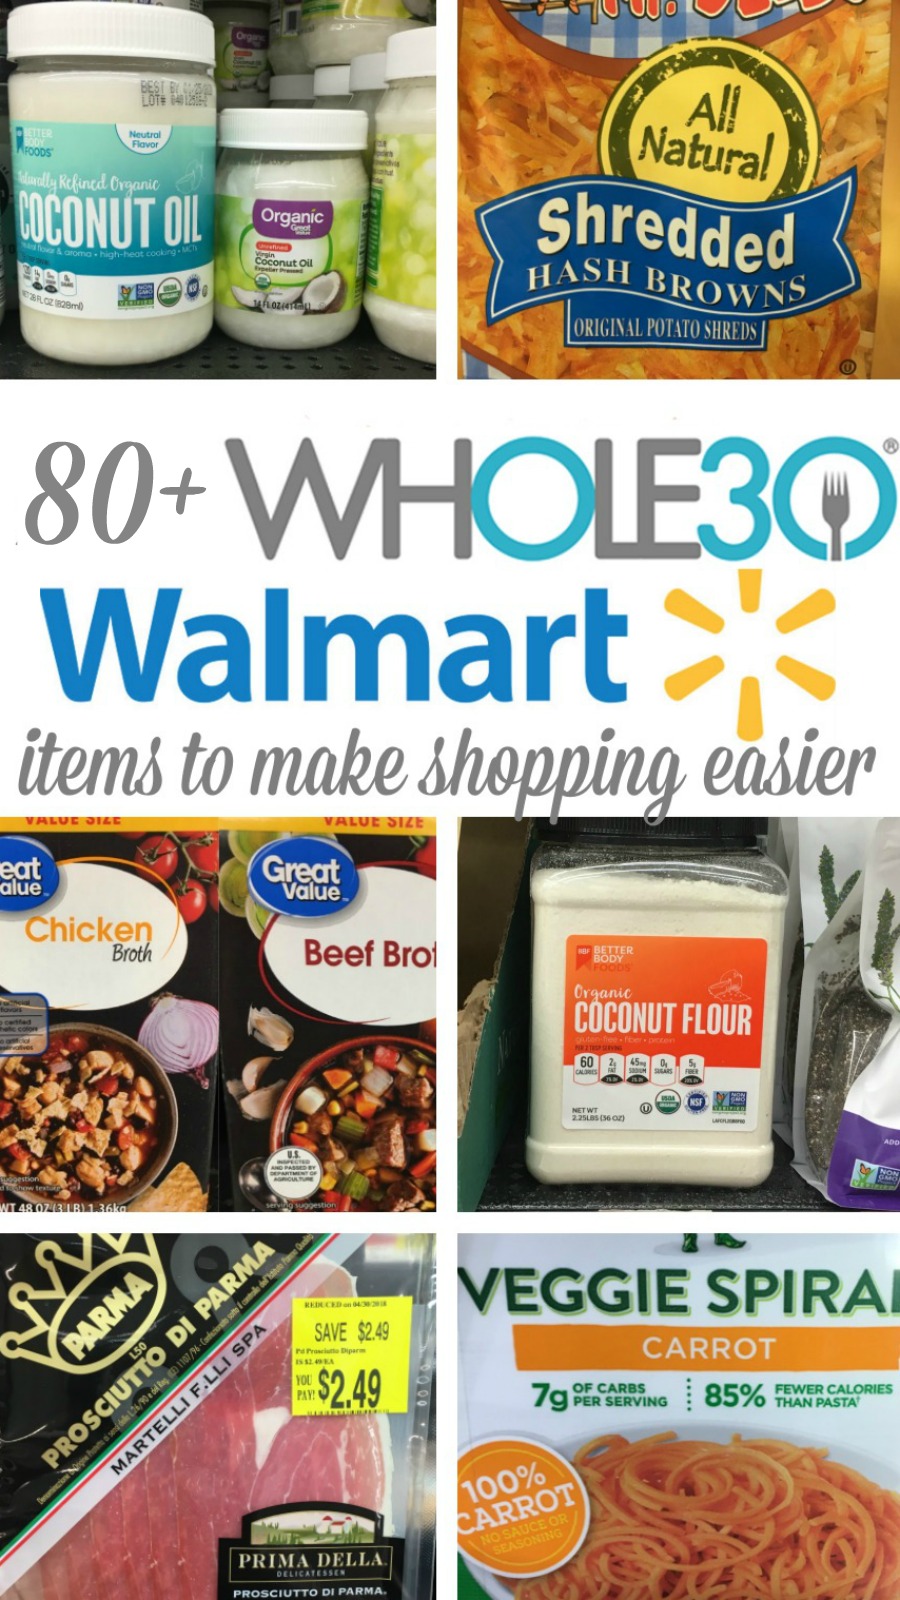 Walmart Whole30 Grocery List: 80+ Compliant Products - Whole